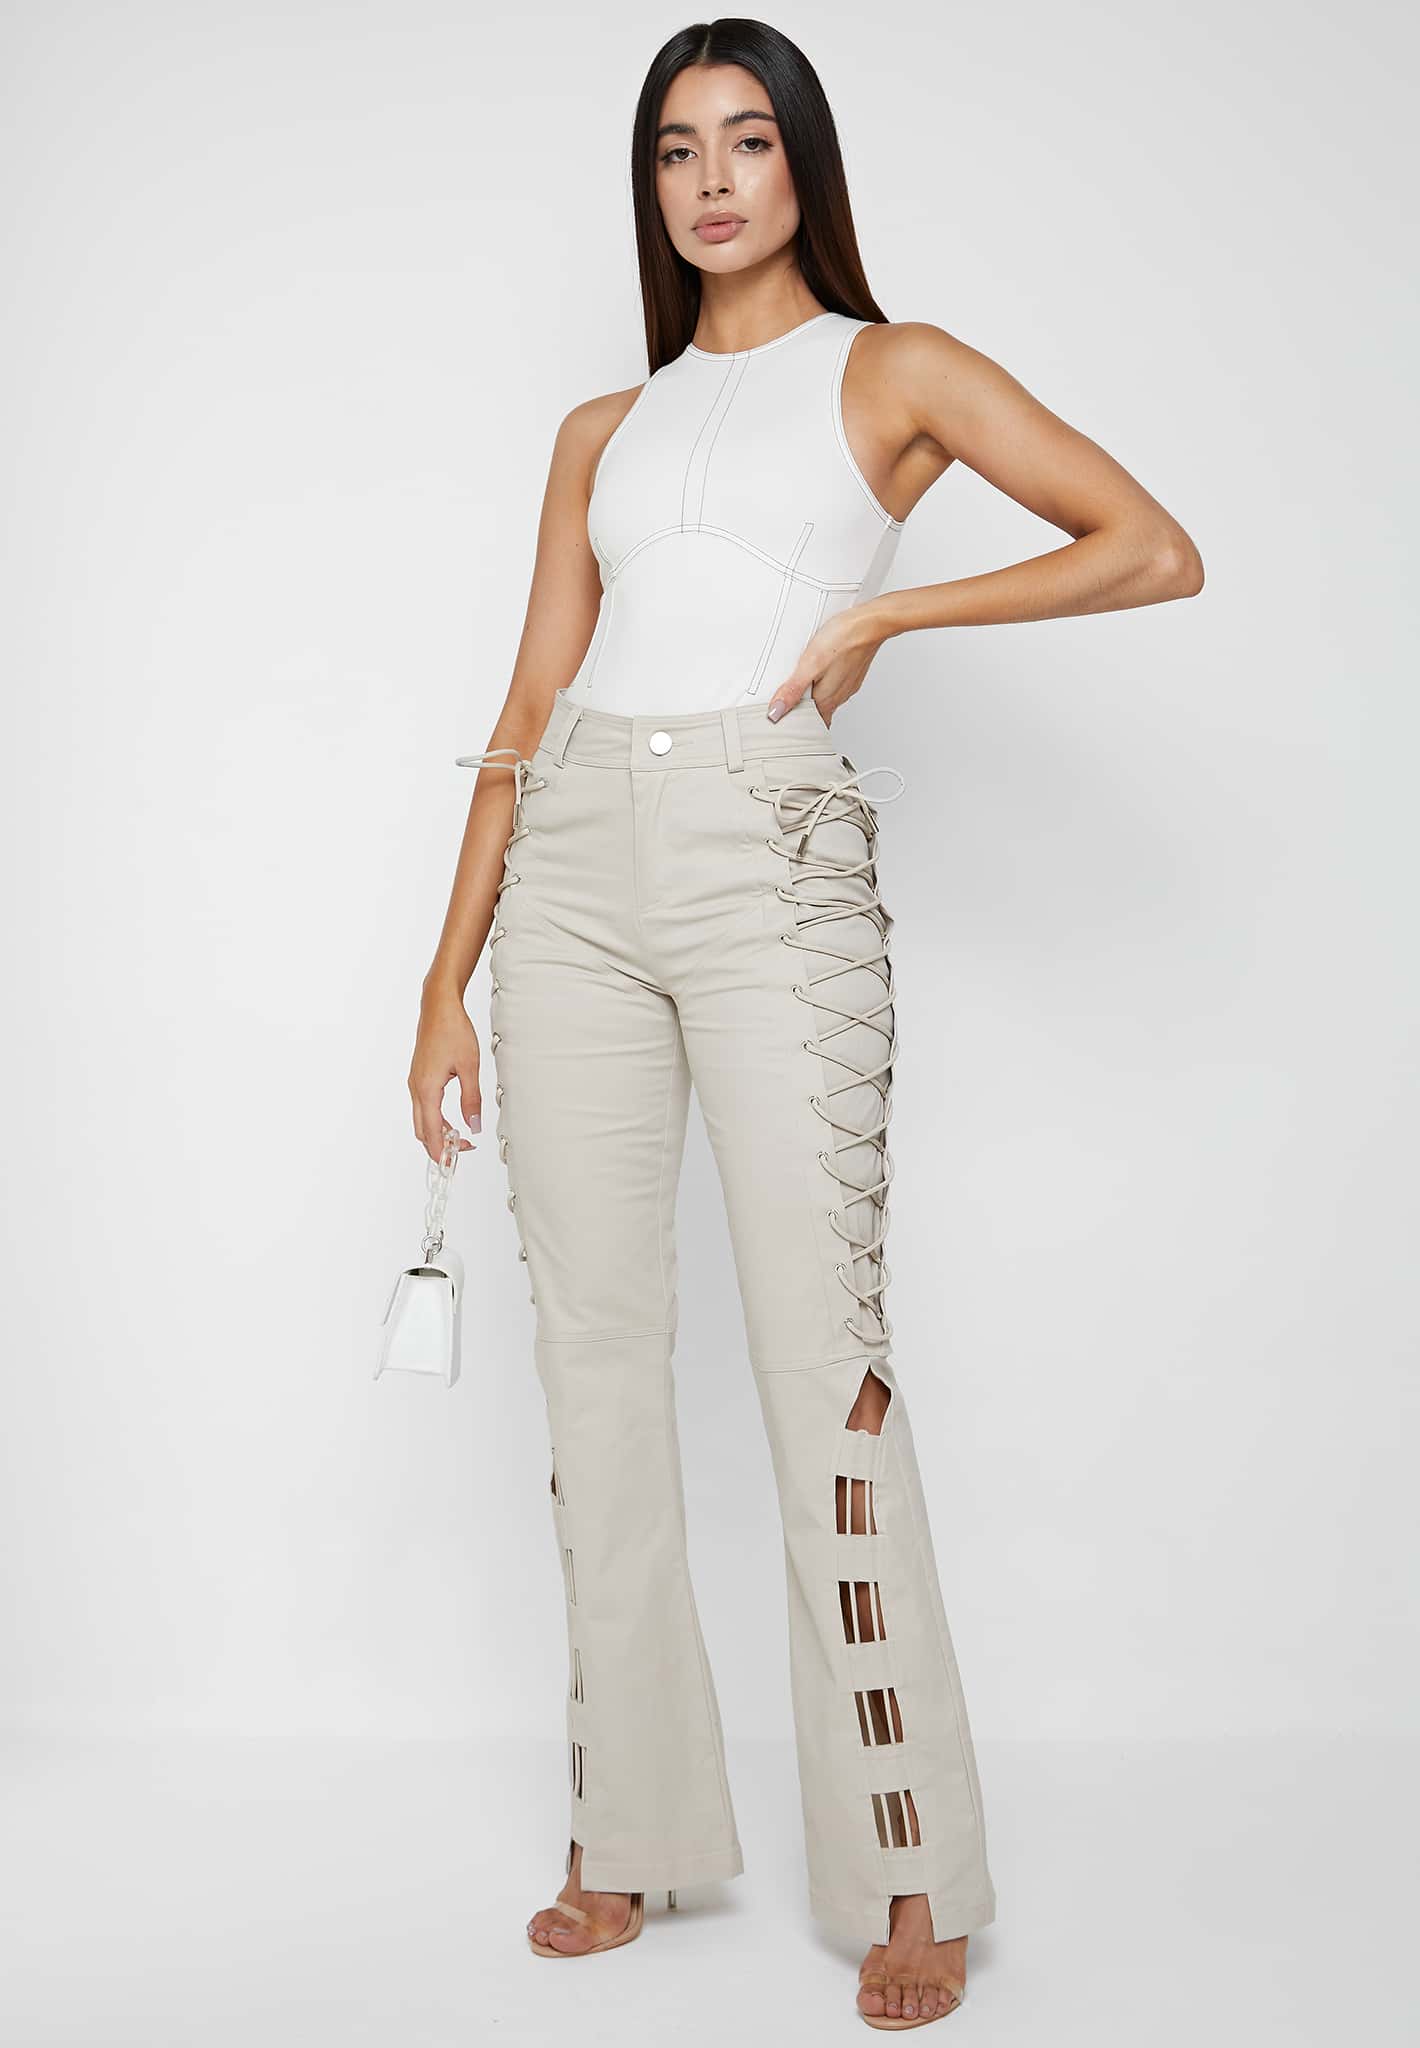 Ruffle Waist Tie Up Trousers - Buy Fashion Wholesale in The UK